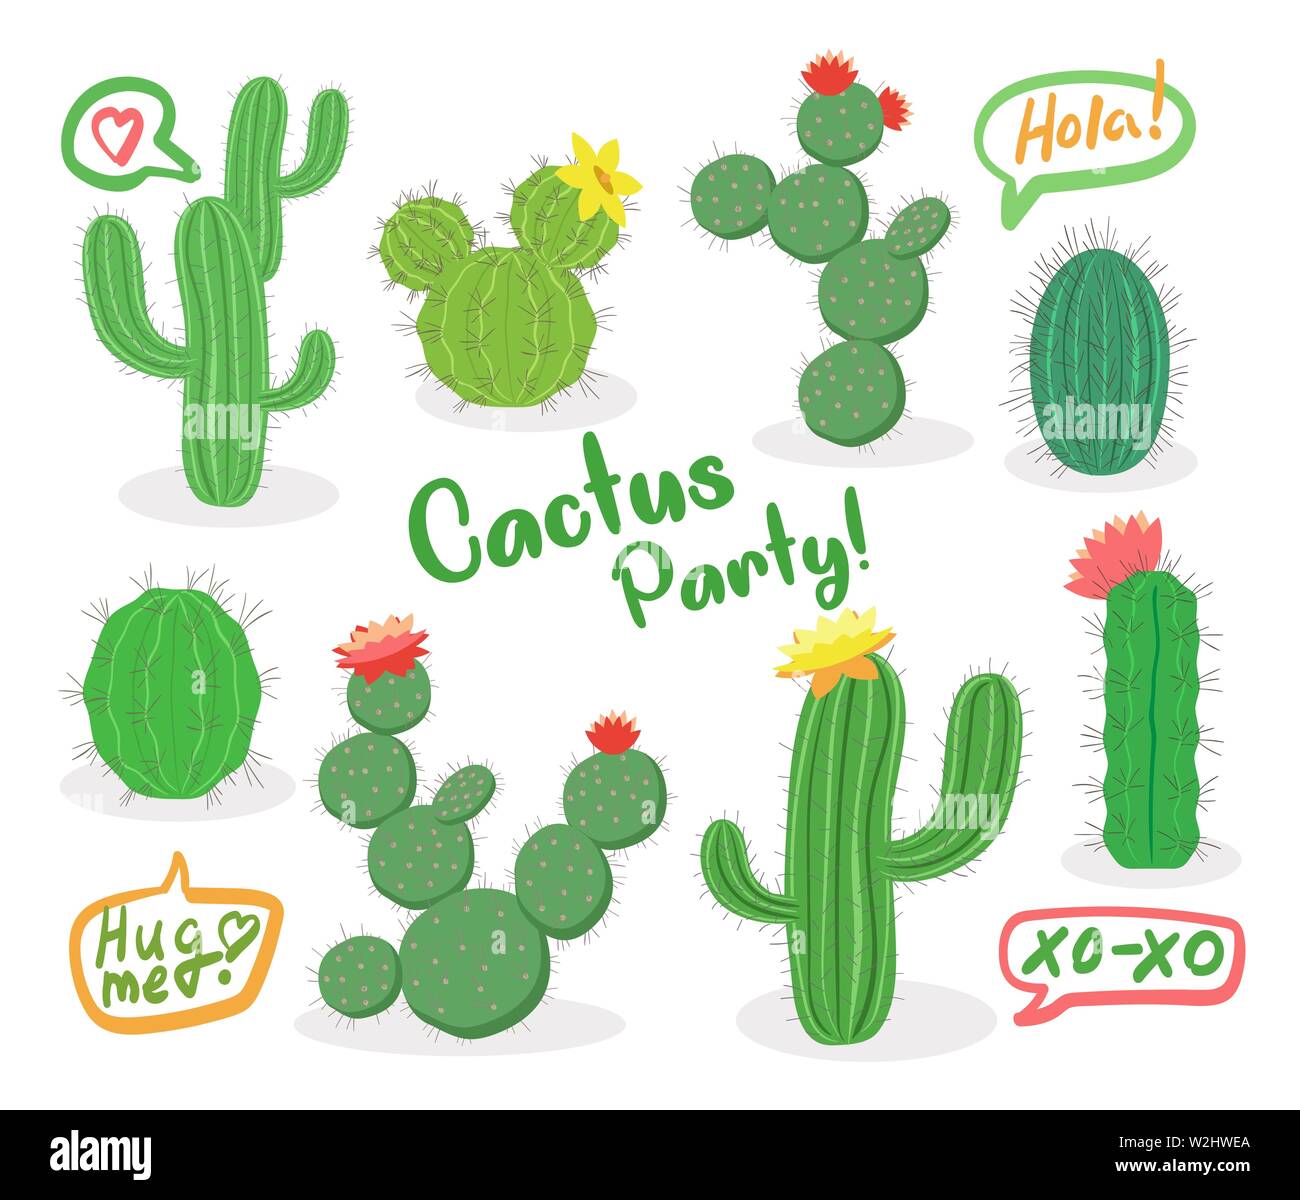 Different green succulent plants with flowers icon set isolated, cactus party, hola, vector illustration. Stock Vector